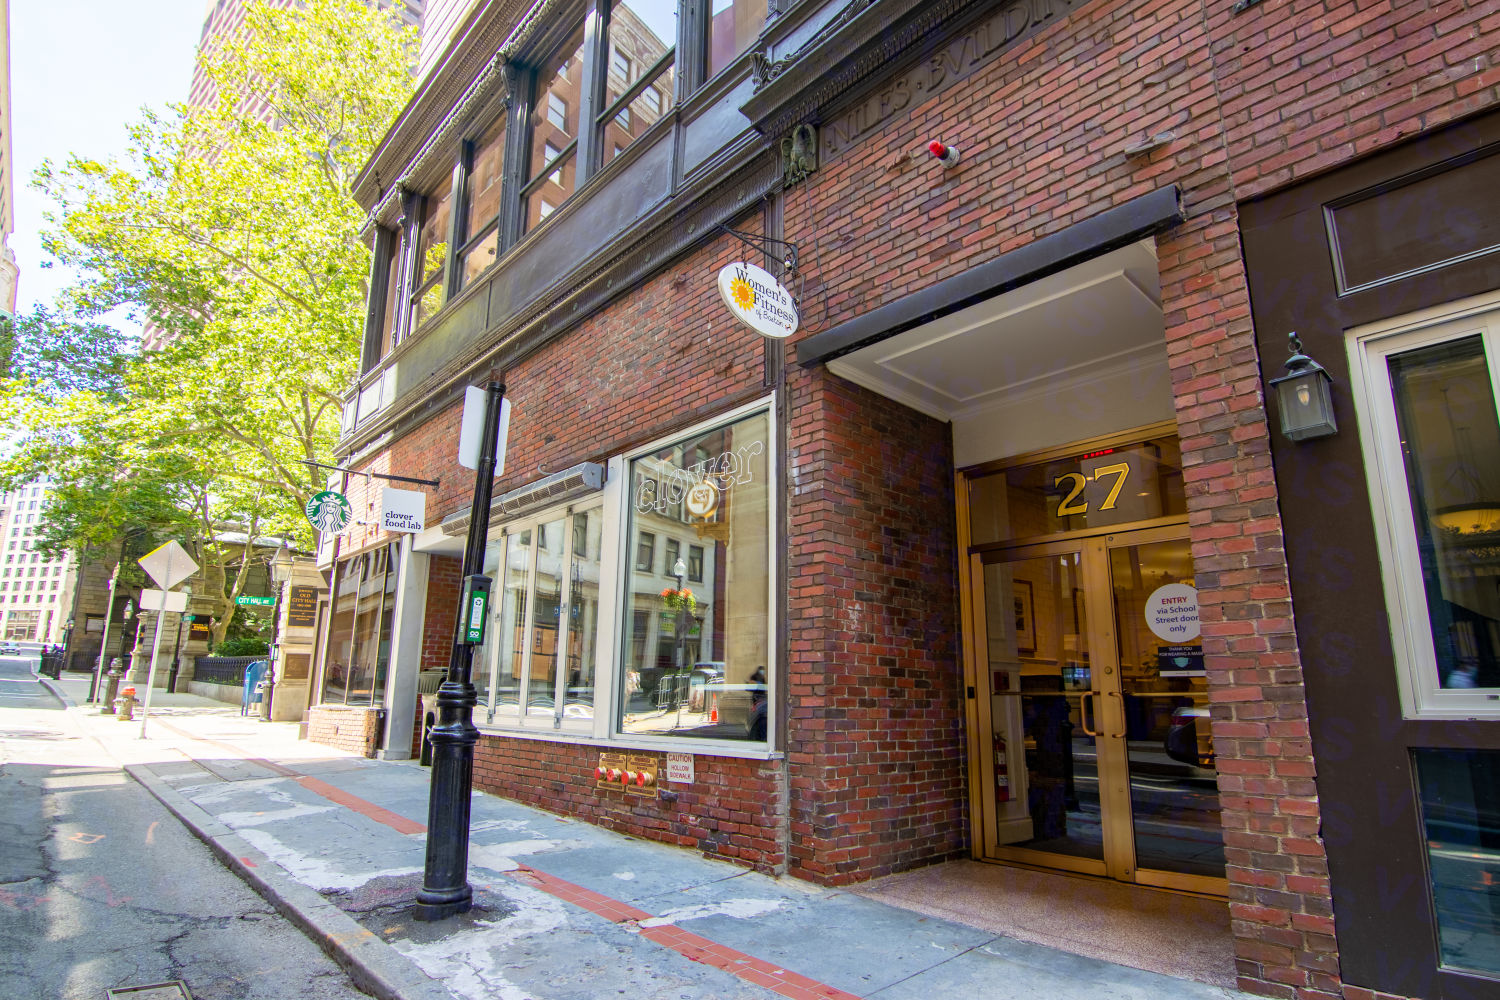 27 School Street, Boston, MA Commercial Space for Rent | VTS